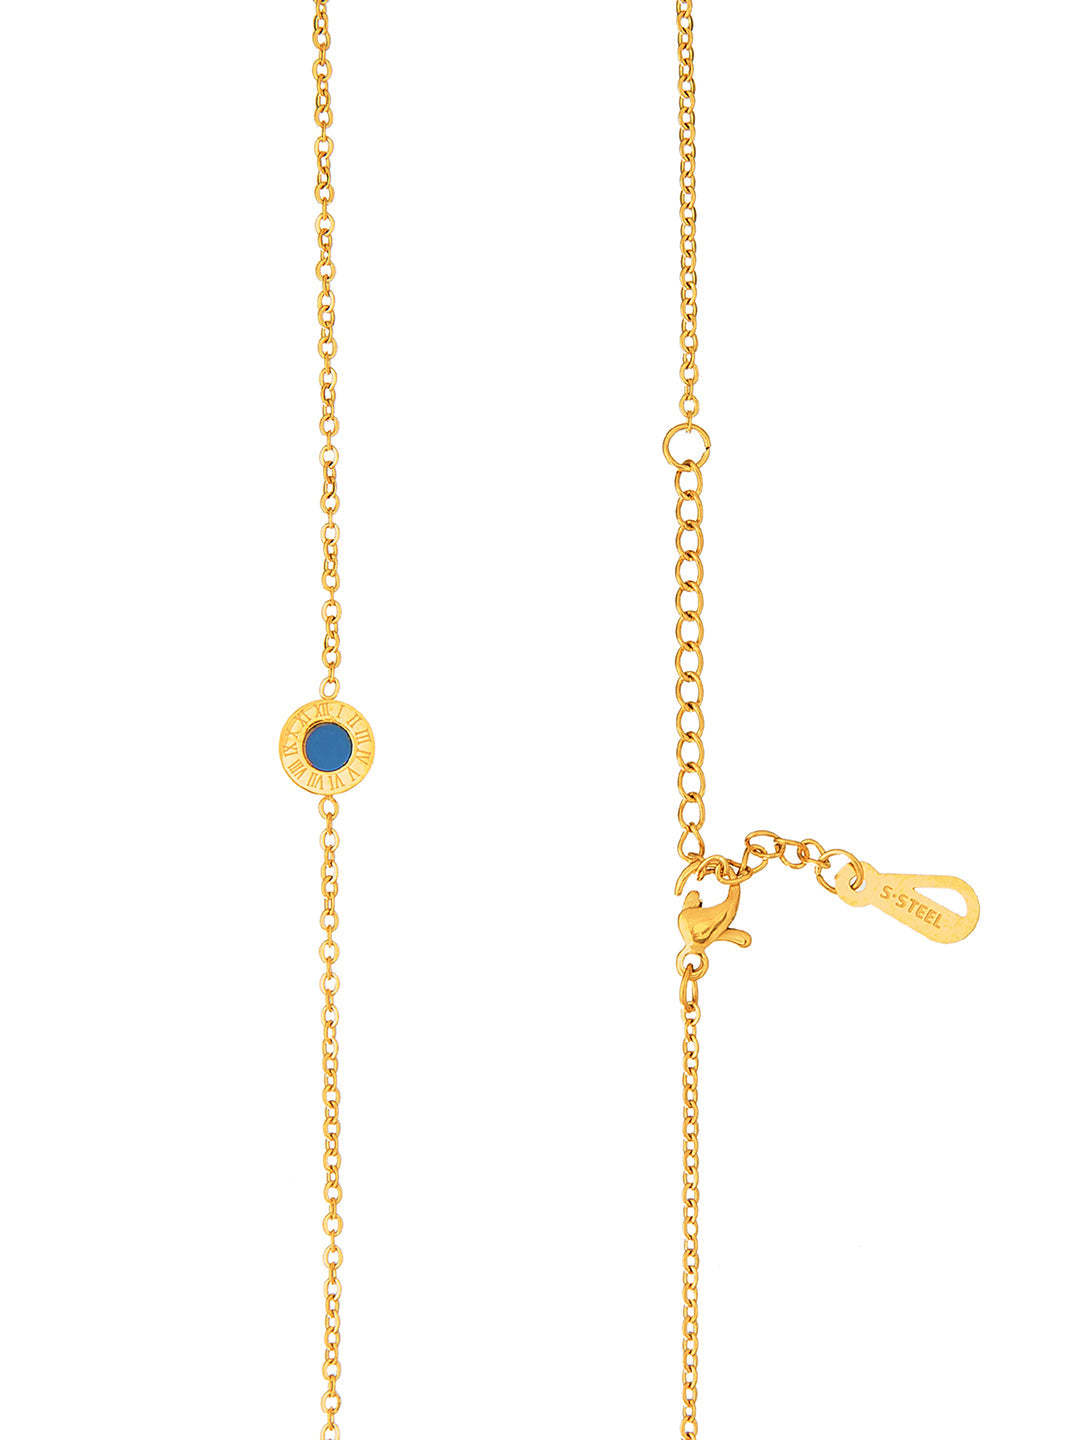 Gold Plated Designer Layer Chain Long Necklace With Matching Earring For Girls Teens Women